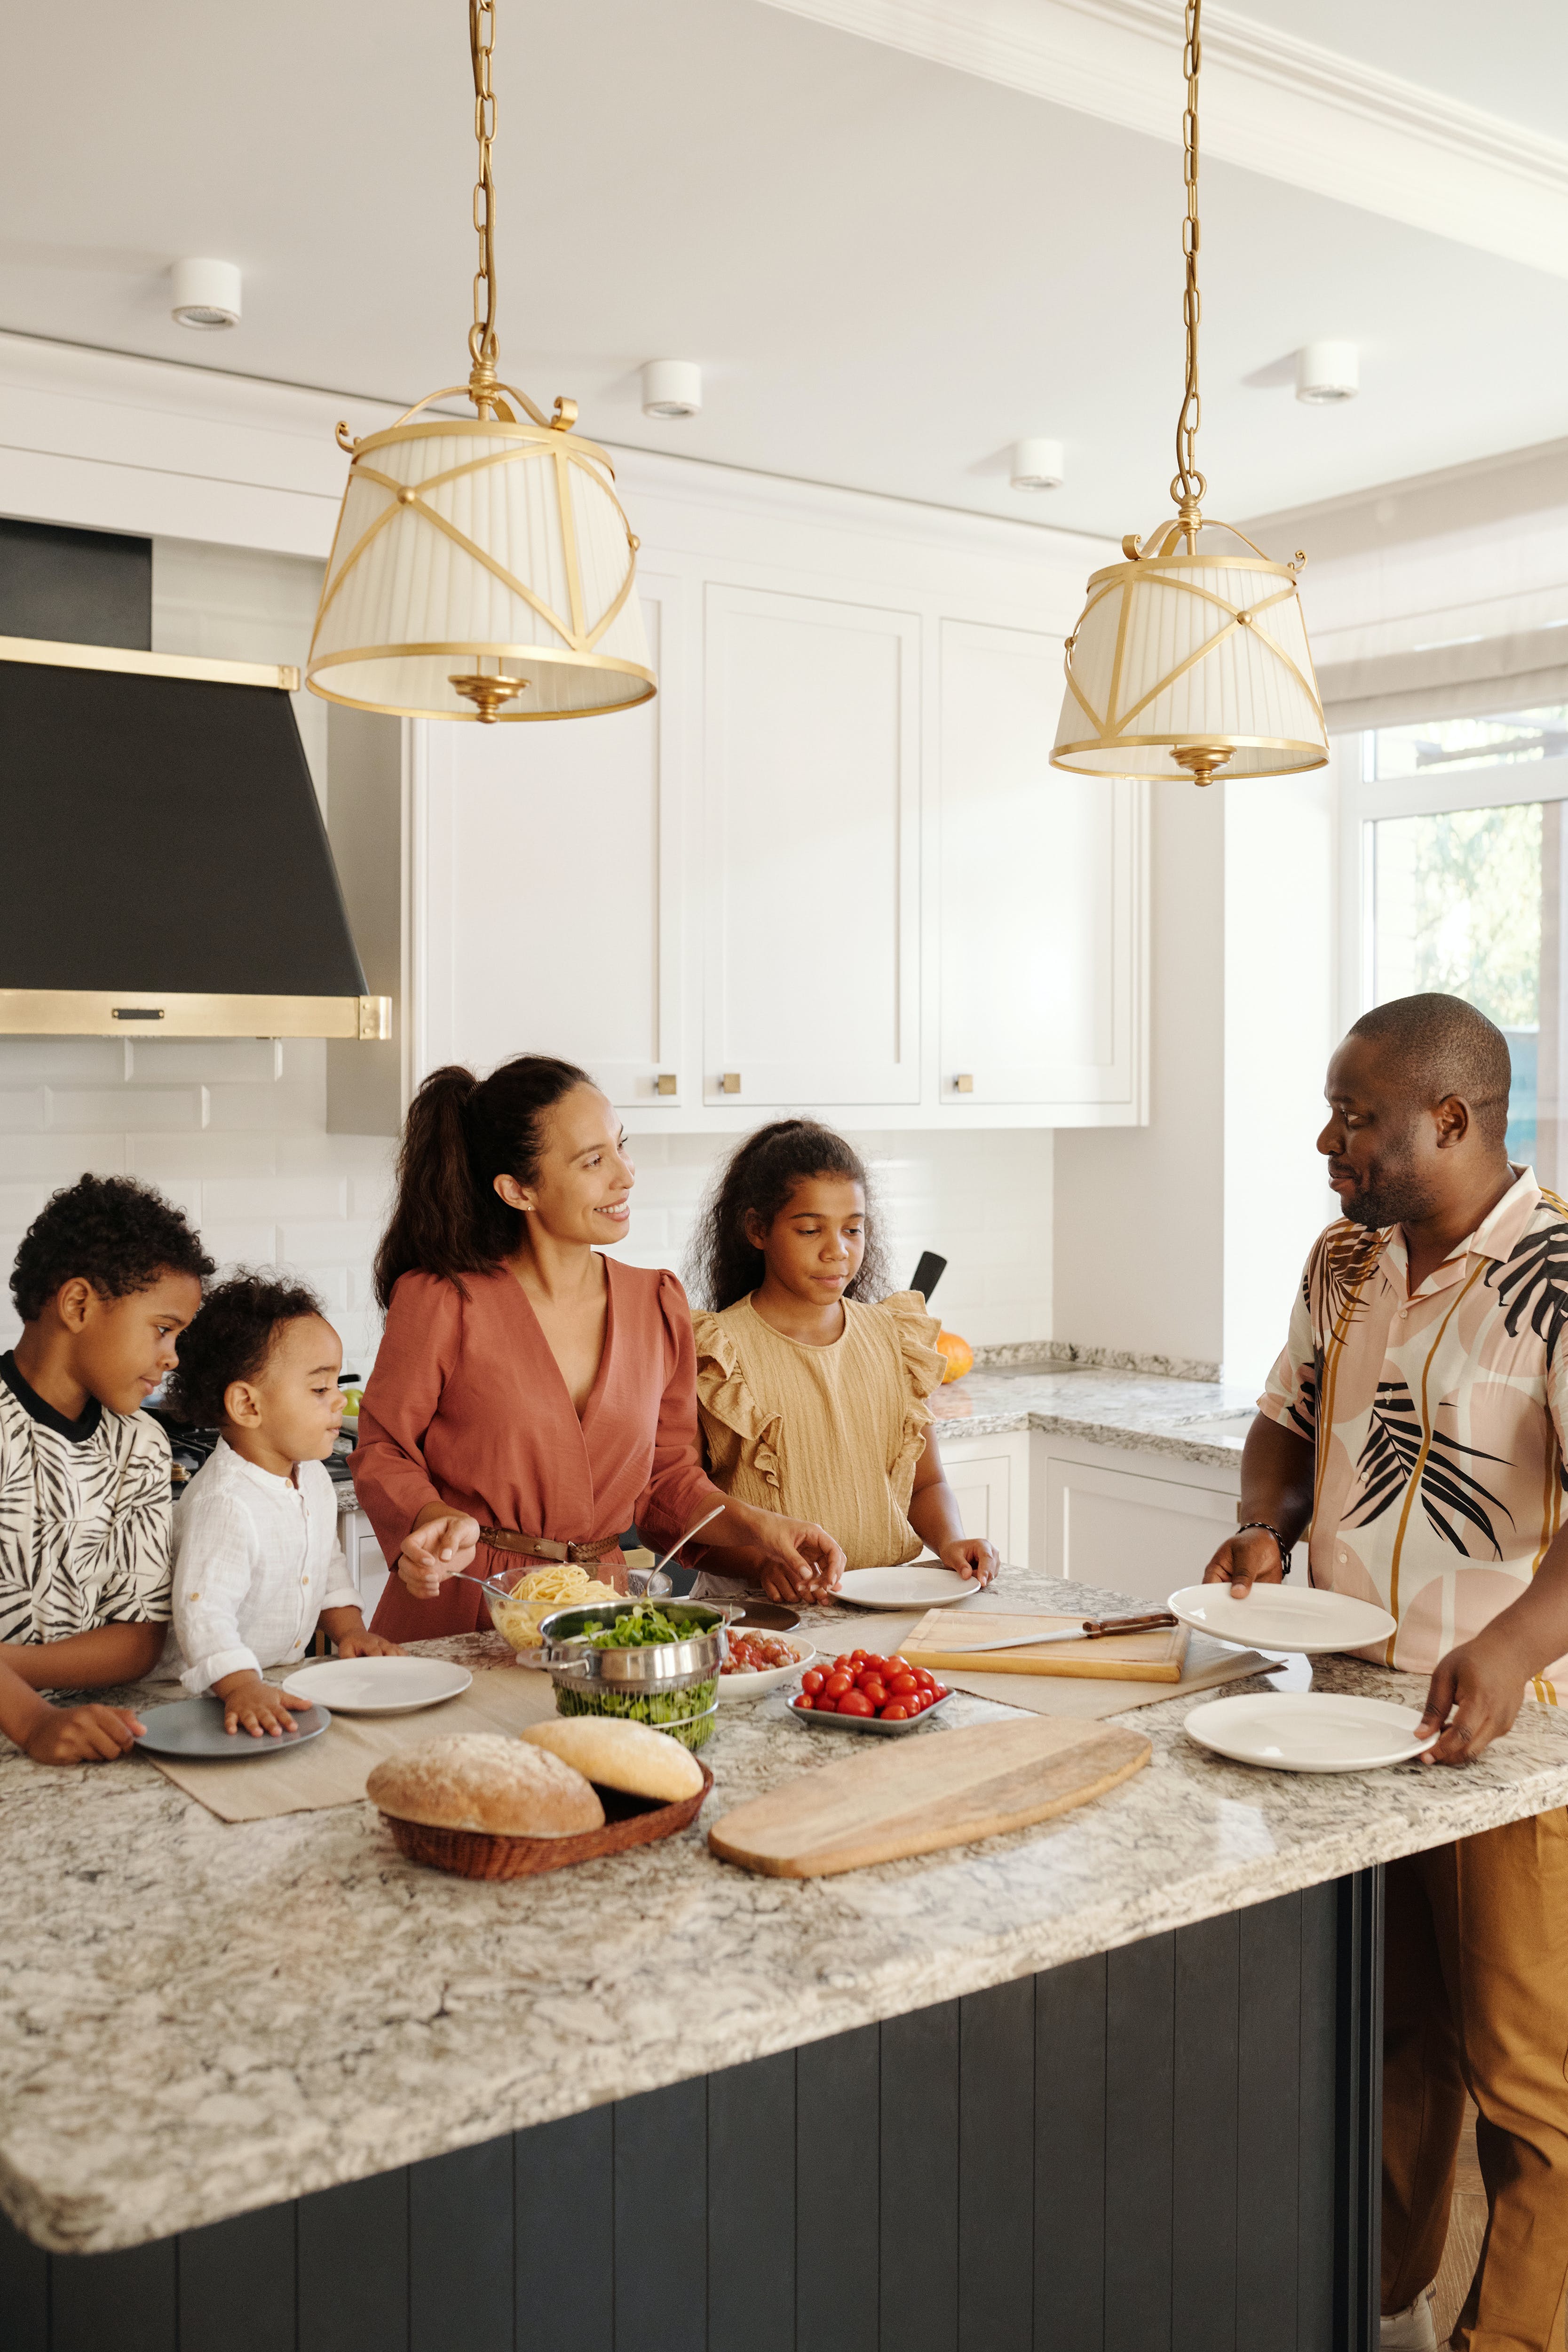 A large family preparing a meal together in the kitchen | Source: Pexels